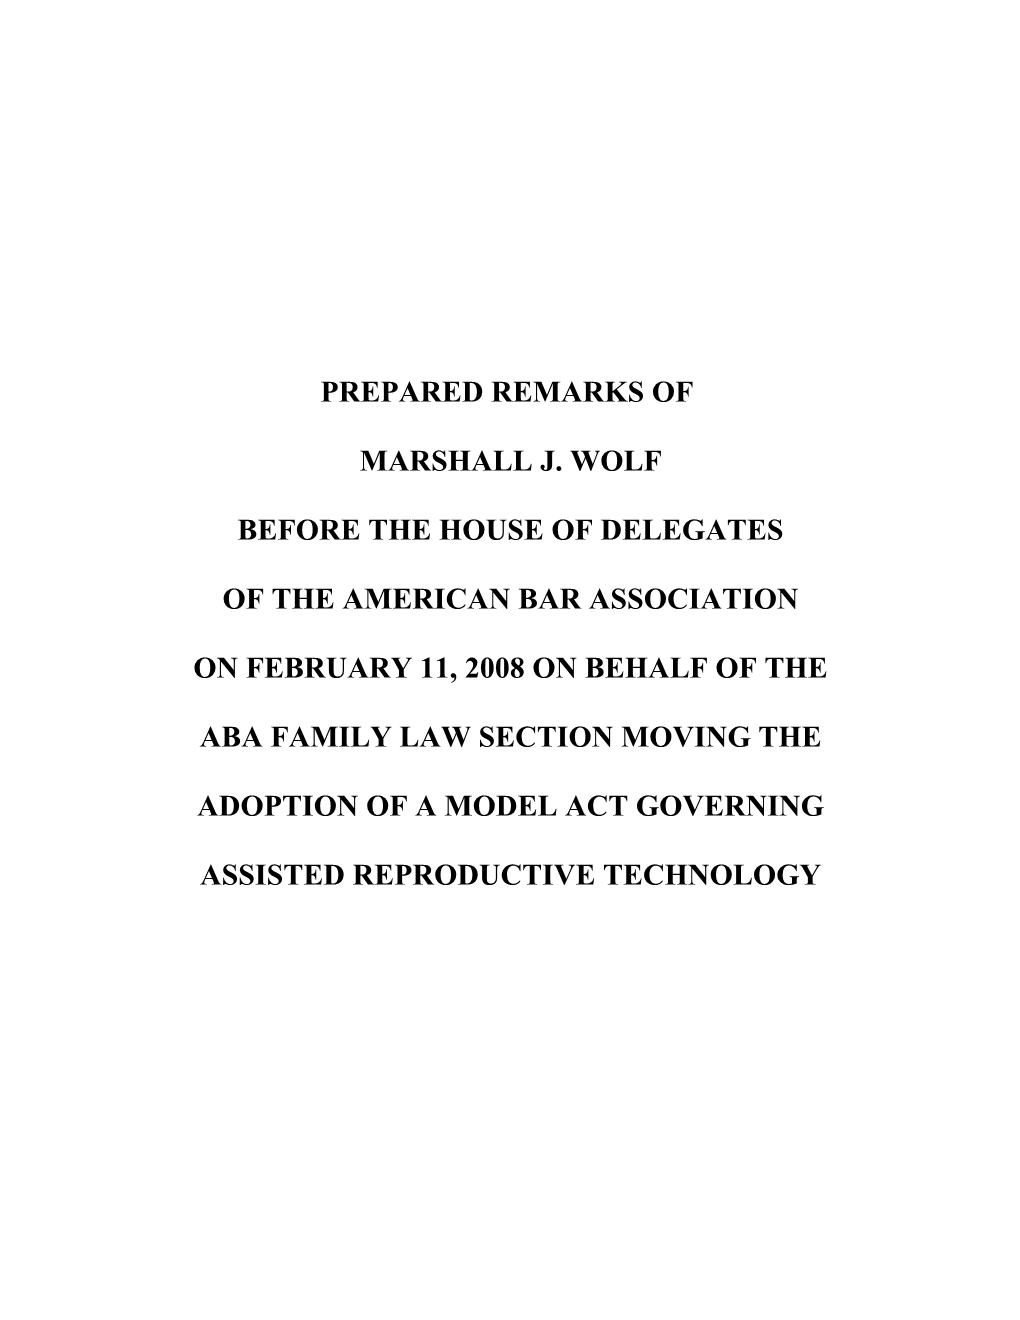 Marshall Wolf's Remarks to ABA House of Delegates, Feb. 2008 - ART Act